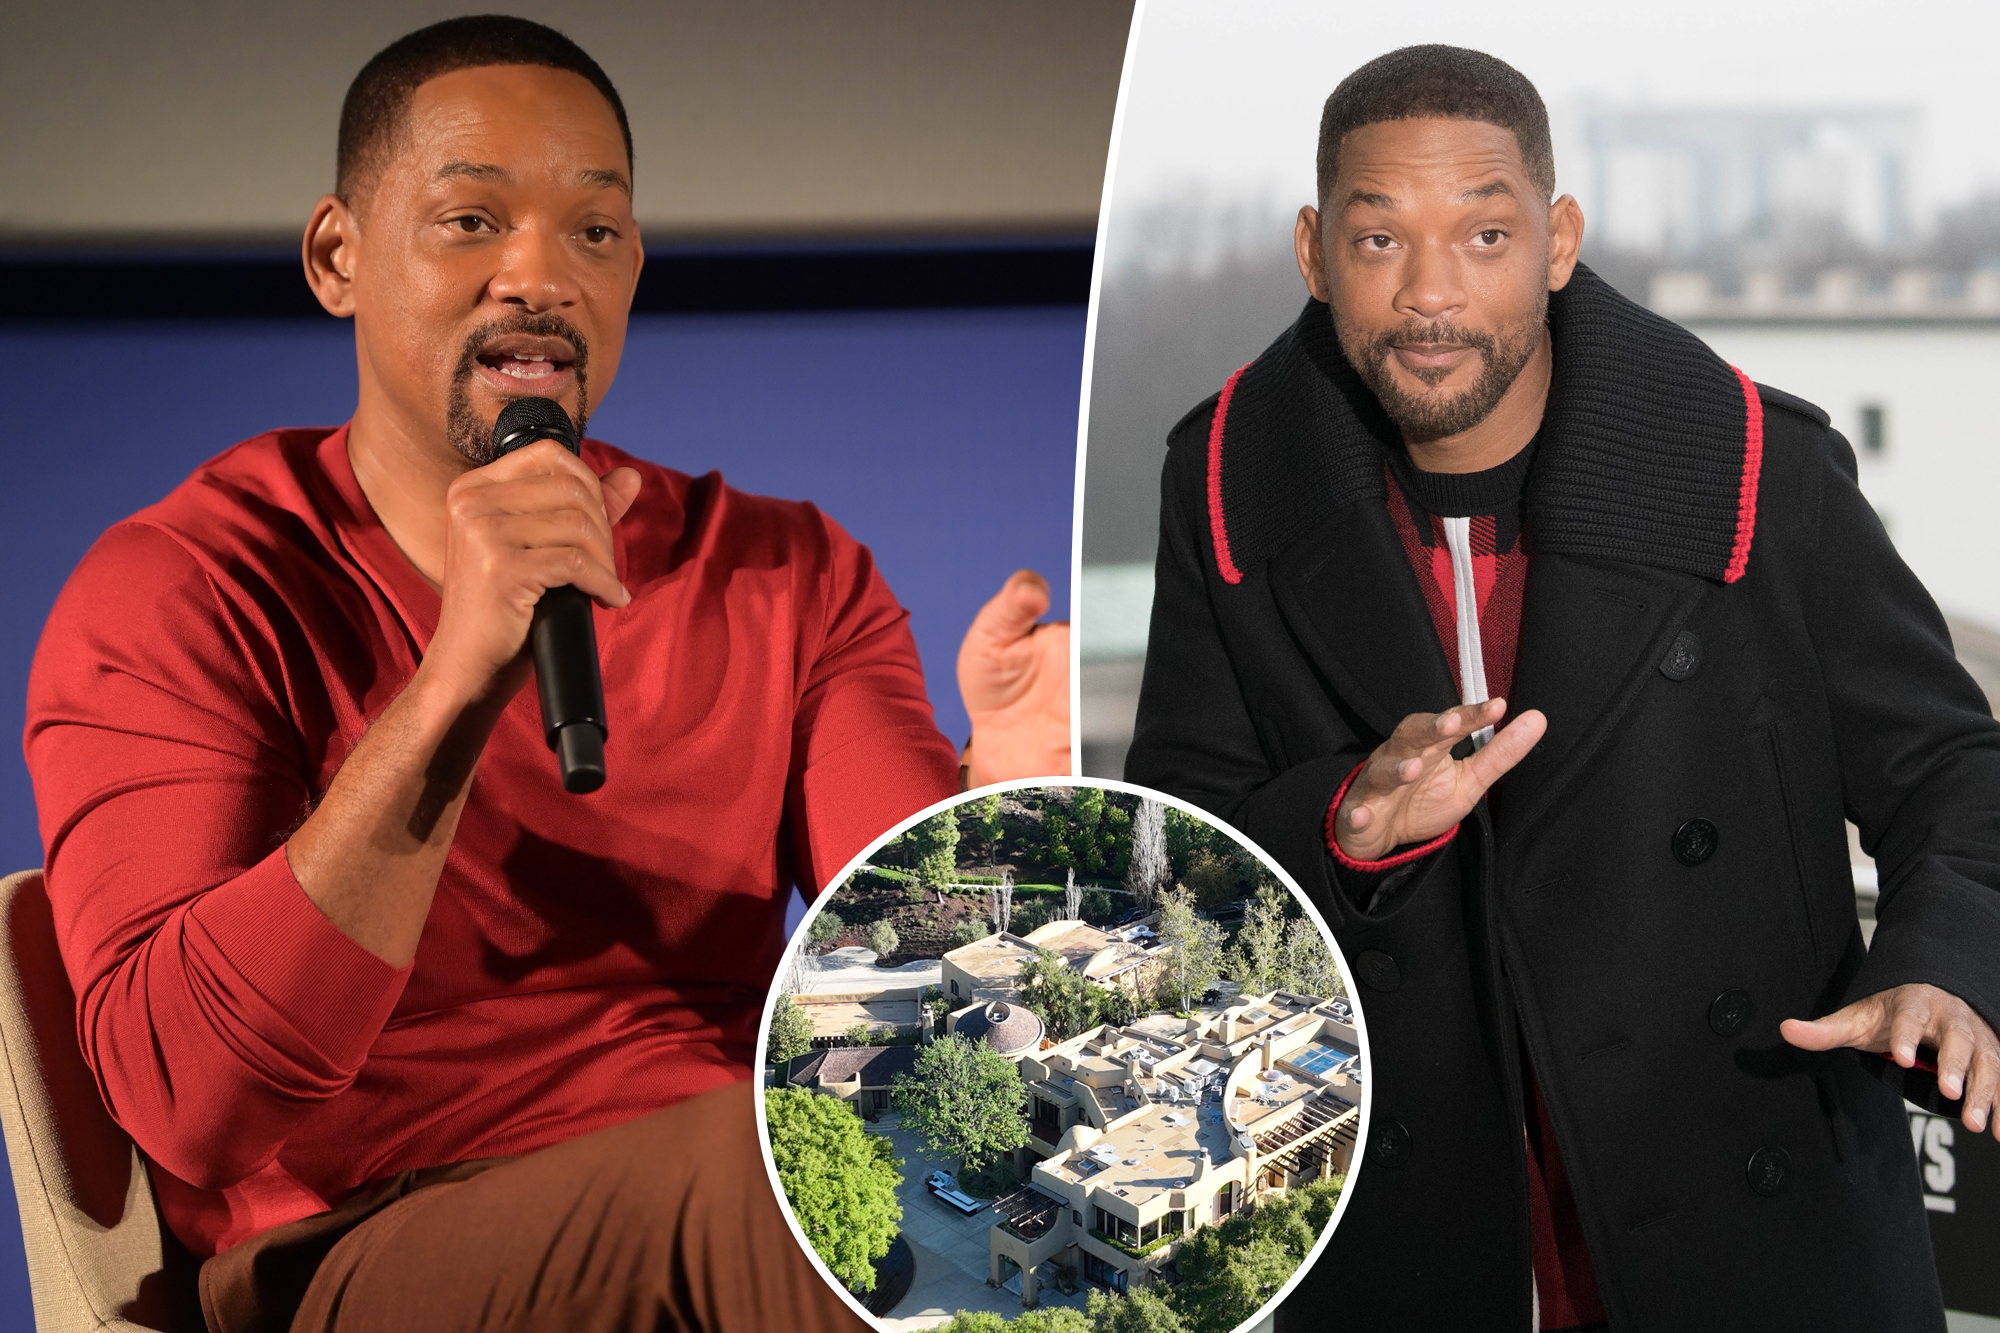 Intruder Arrested for Trespassing at Will Smith's Los Angeles Home